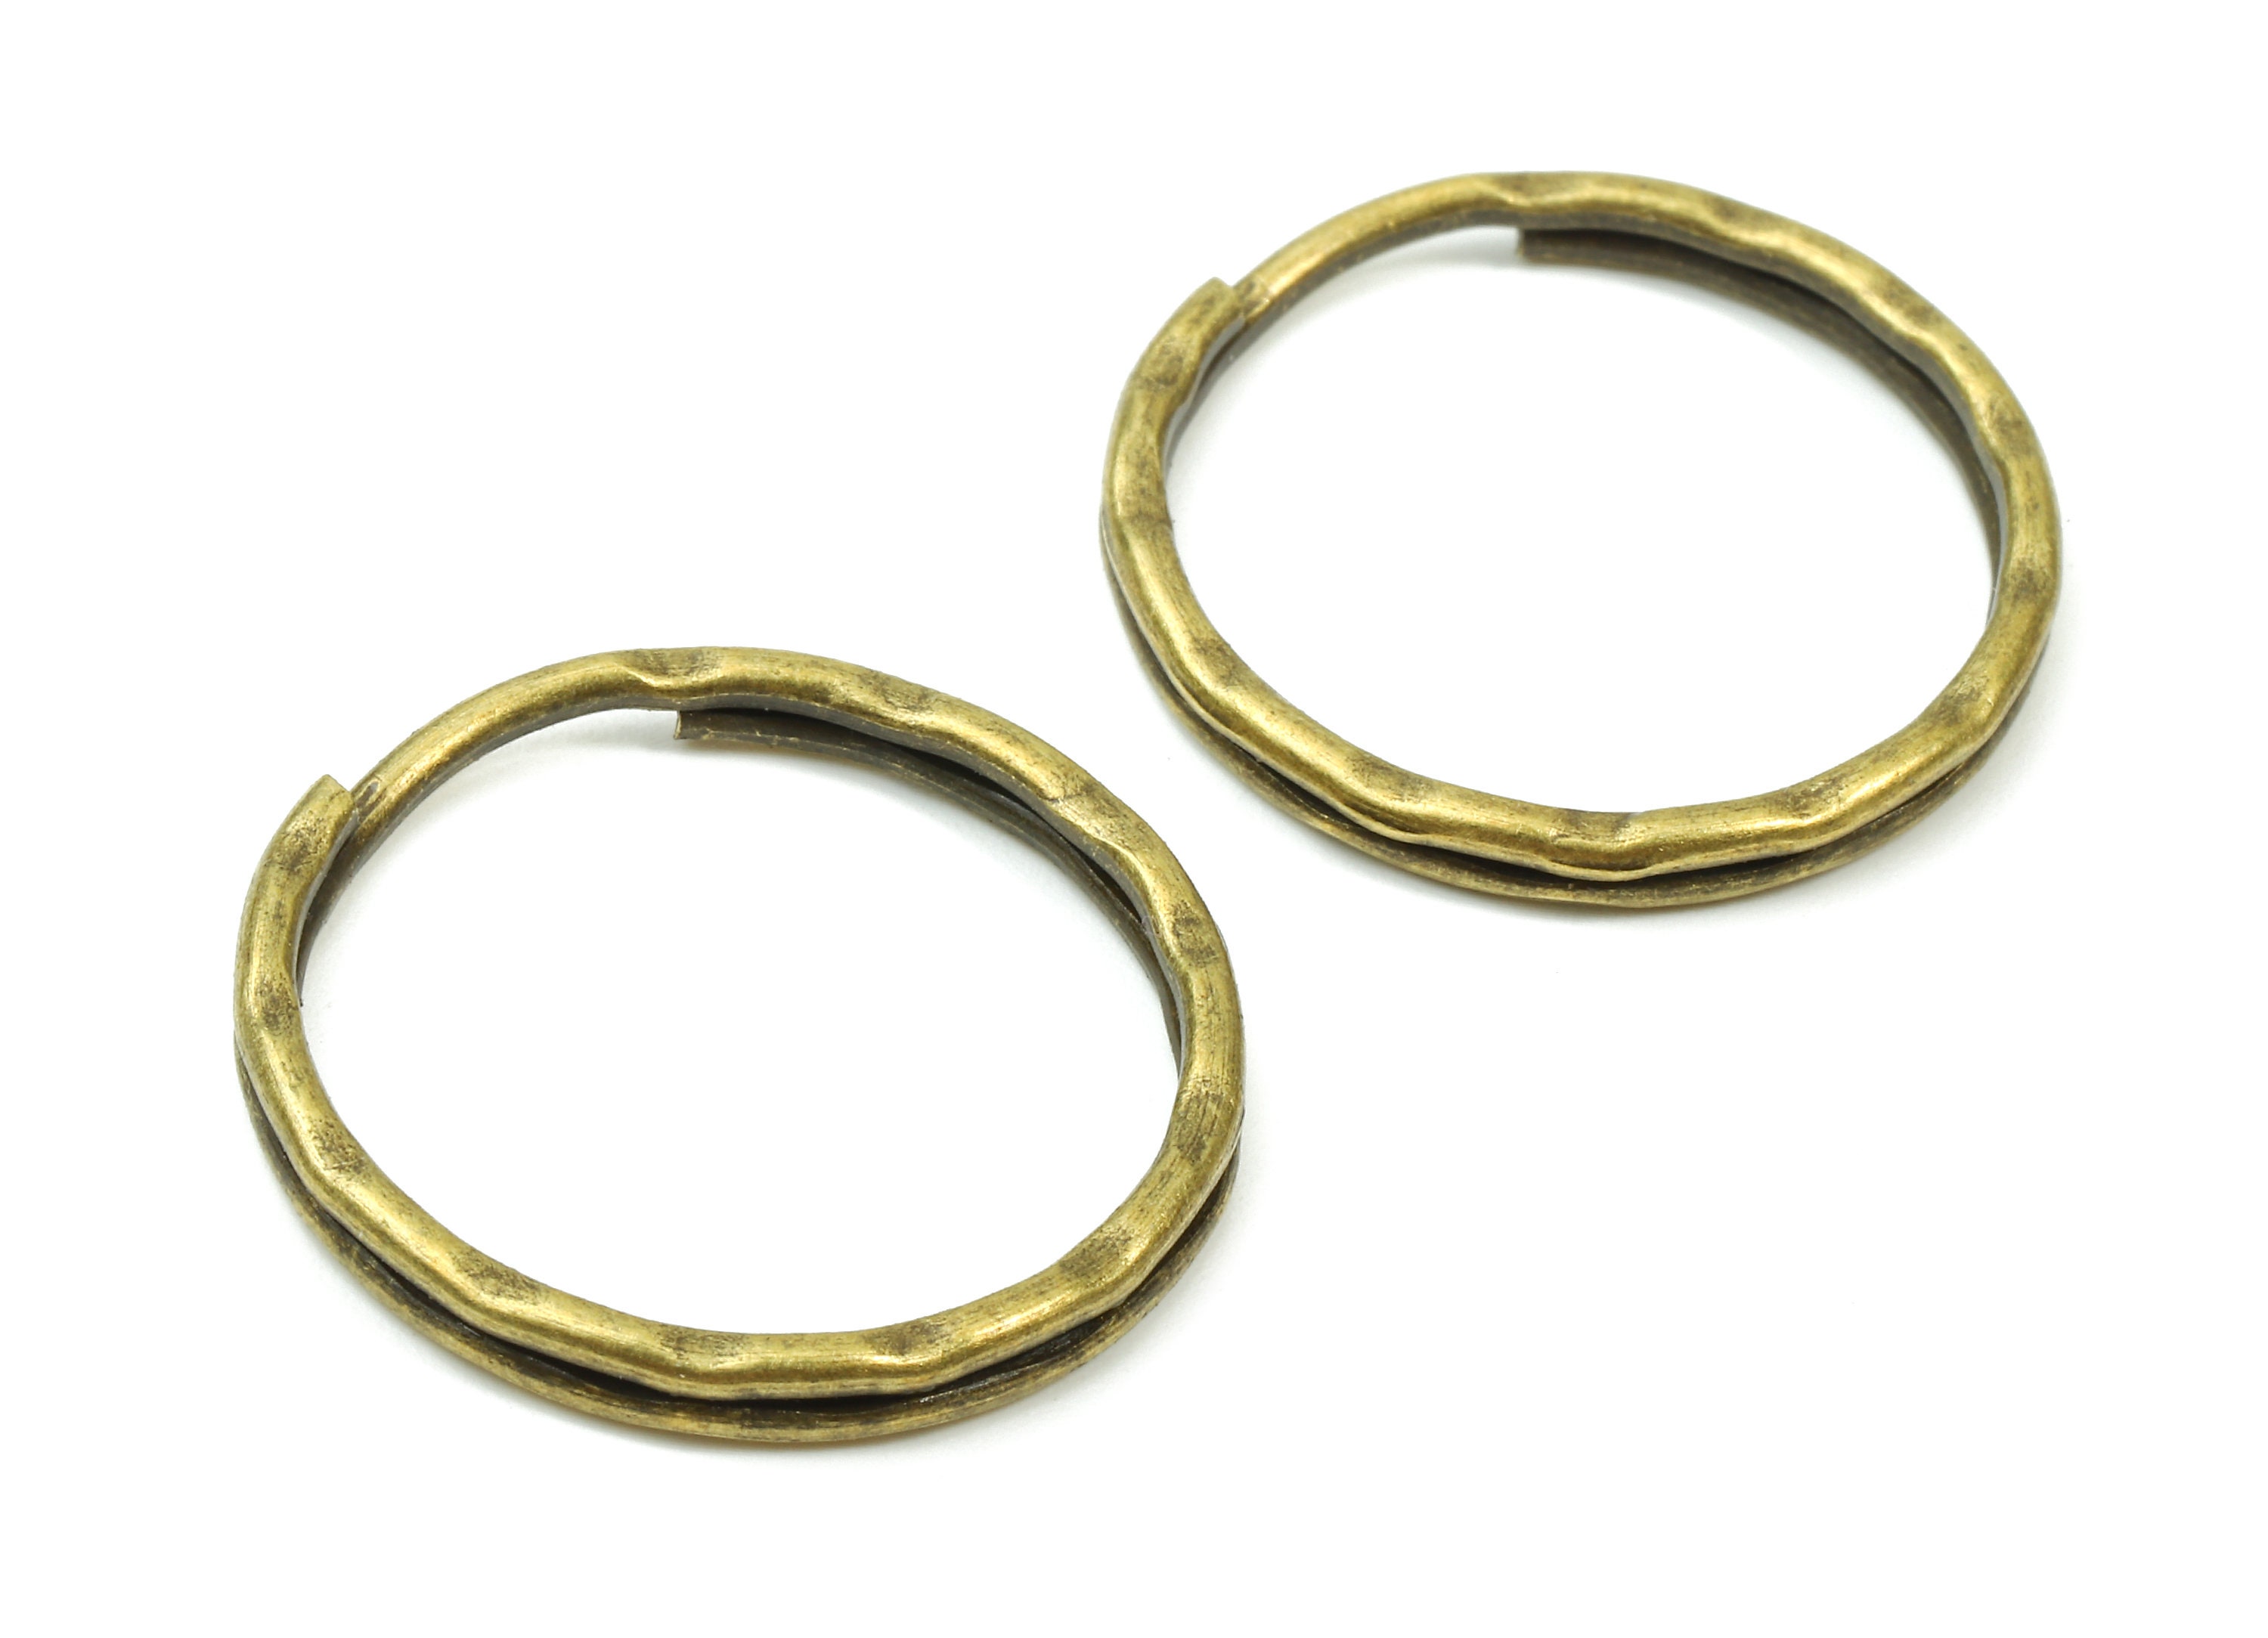 12pcs Solid Key Rings Split Rings 40mm 30mm Bronze Key Rings for Keychains  Round Rings Available in Two Sizes 